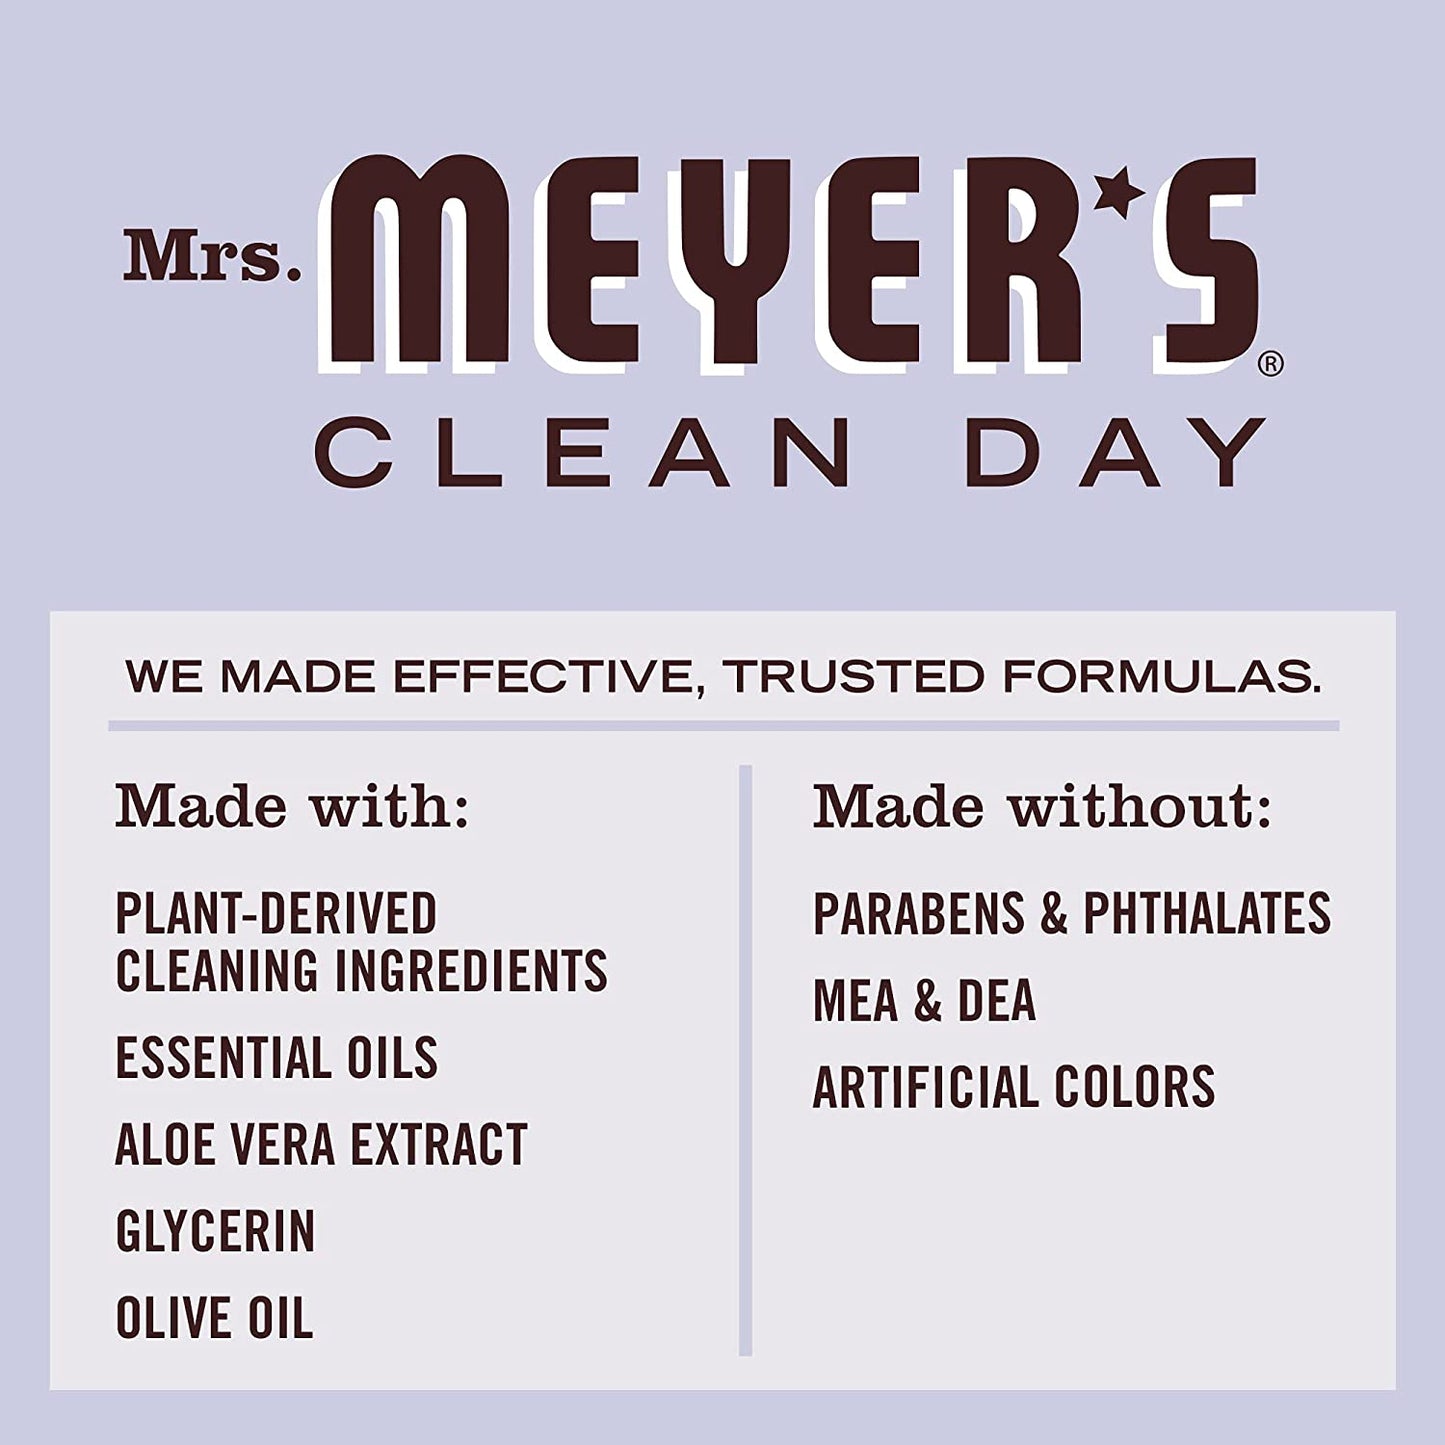 Mrs. Meyer's Hand Soap, Made with Essential Oils